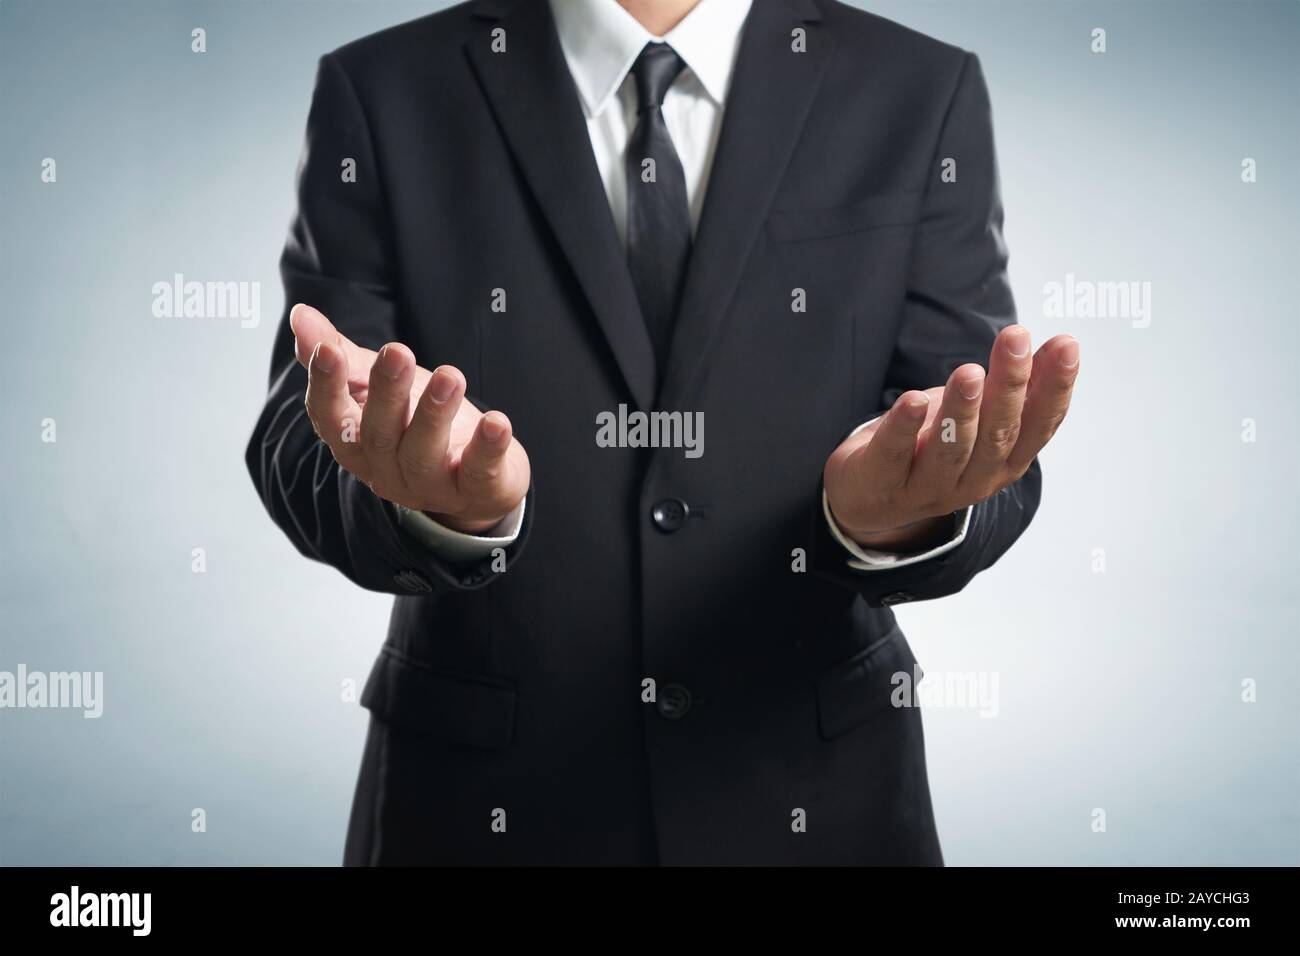 Businessman  in black suit lending a helping hand Stock Photo